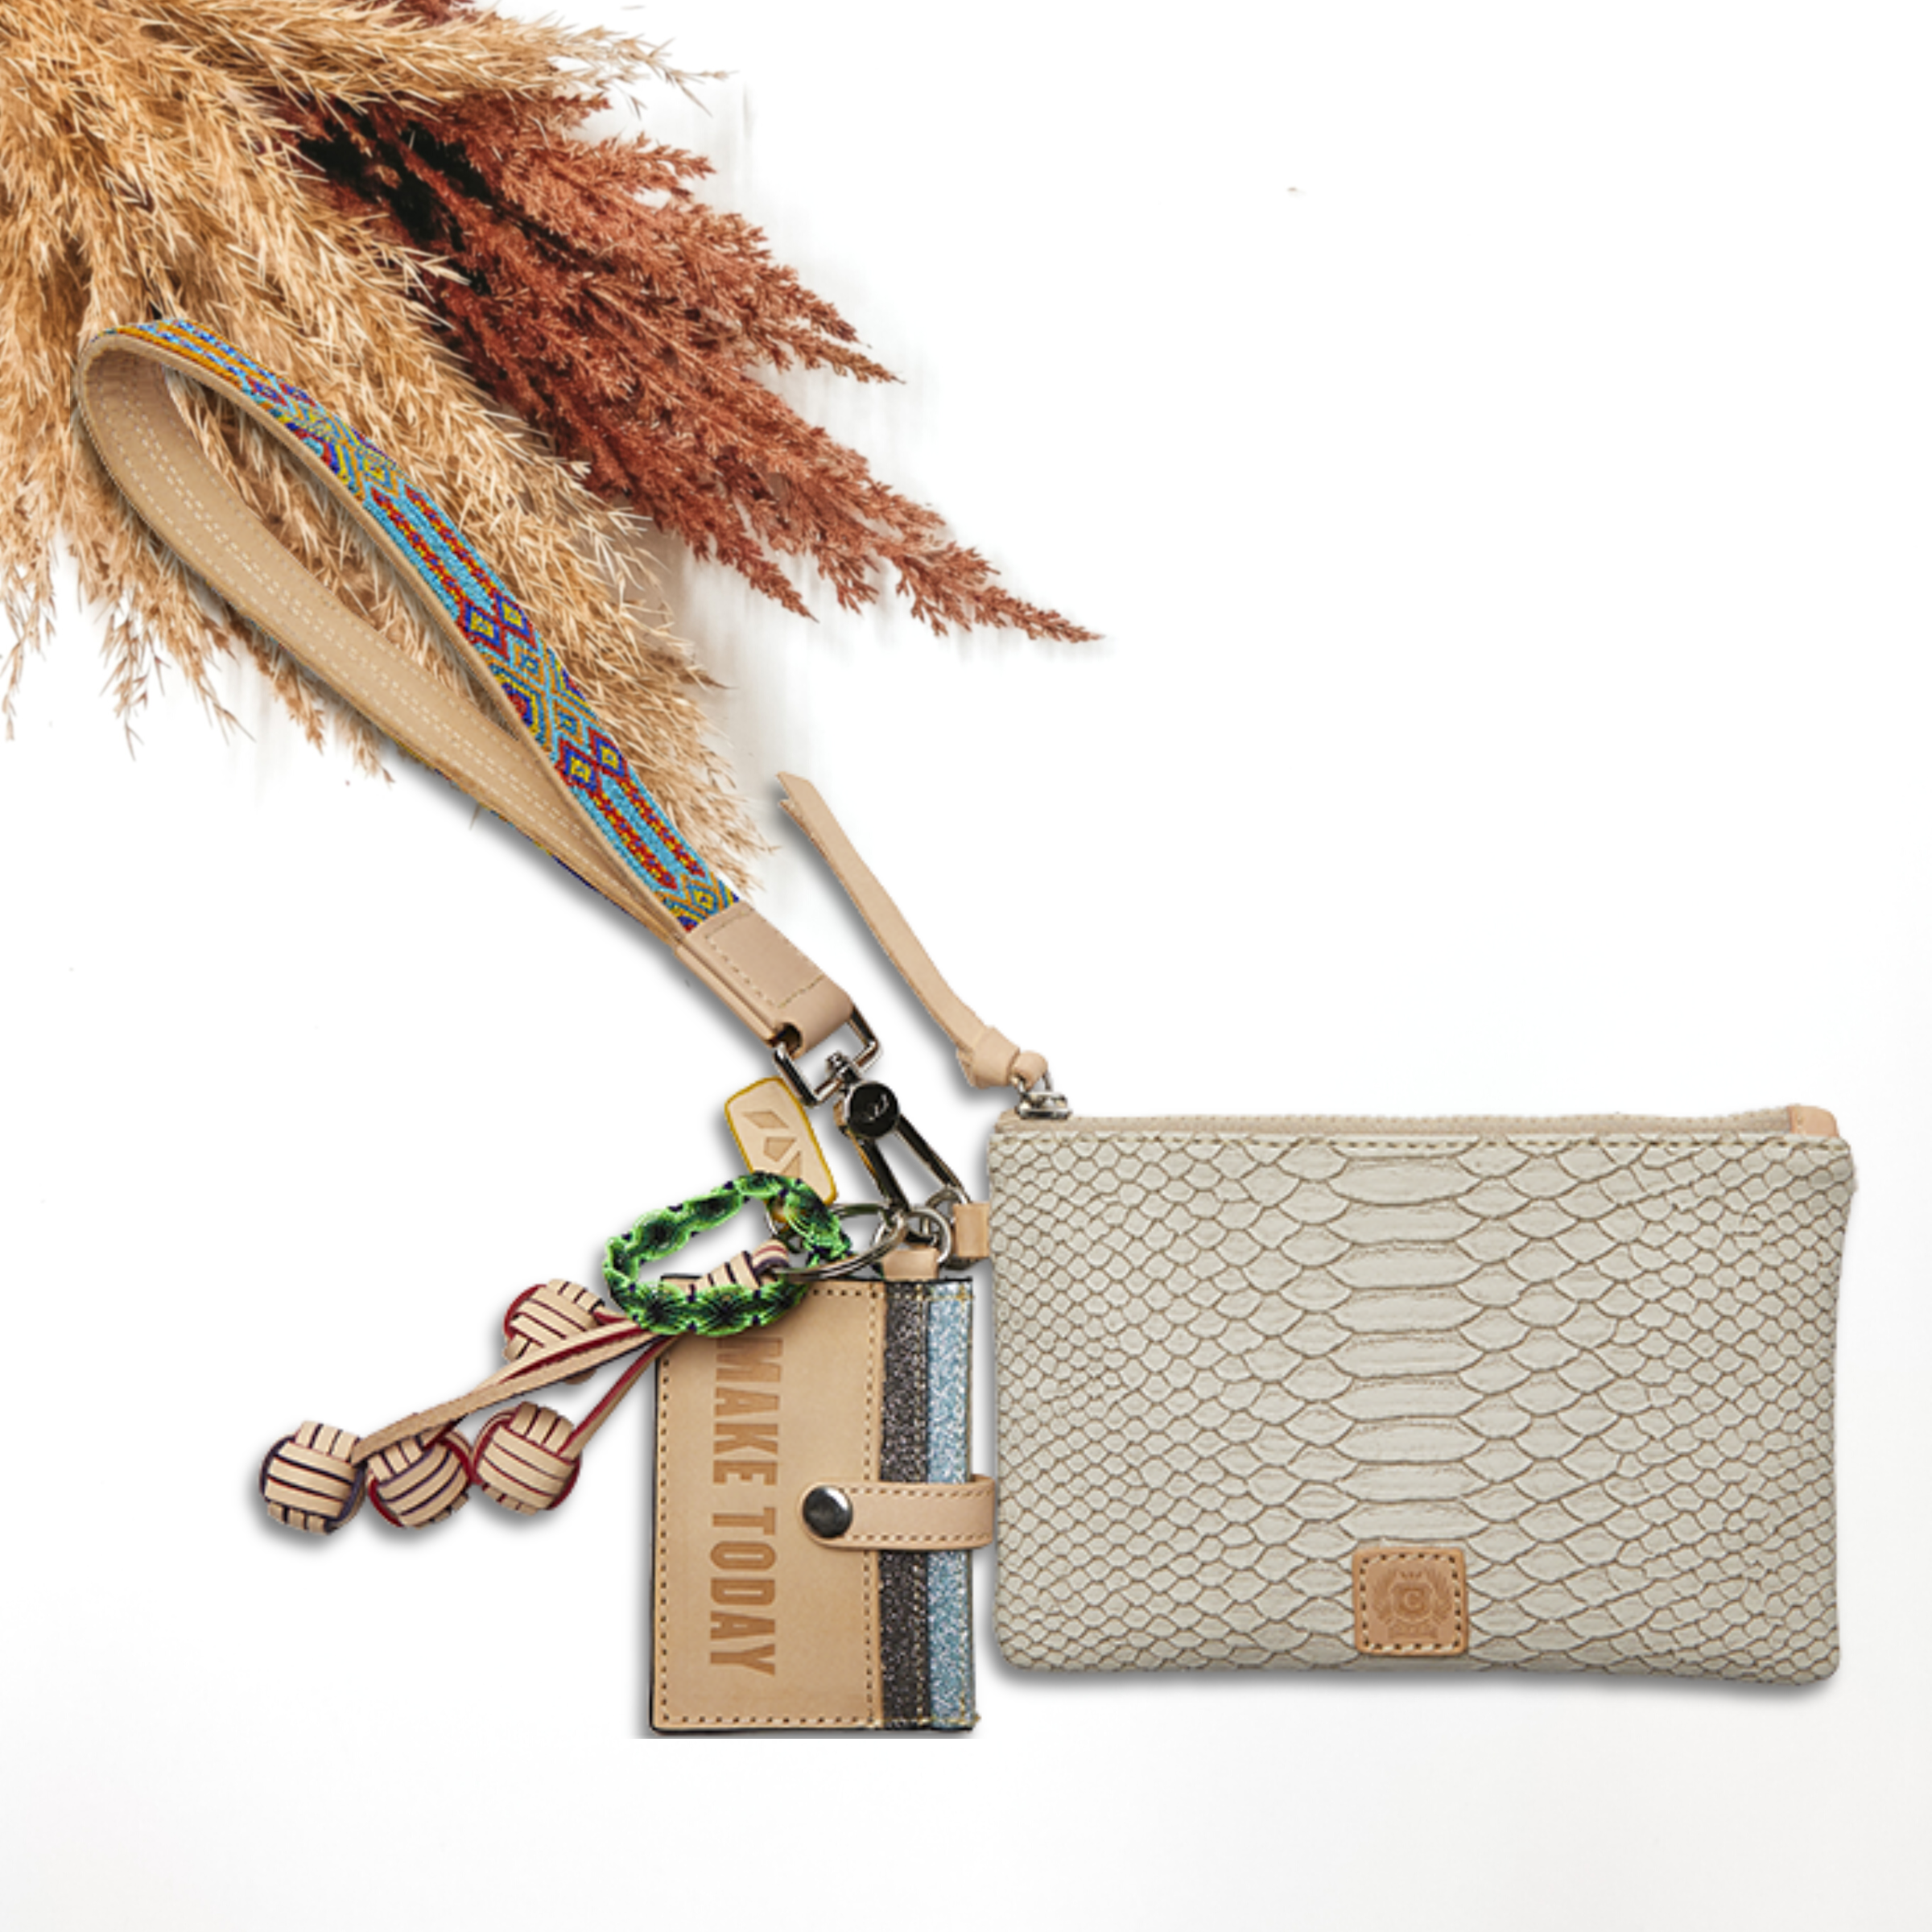 Pictured on a white background is a snake print pouch with a multicolor embroidered wristlet. This pouch also includes a tan charms, light tan tassel on the zipper, and a card holder keychain.